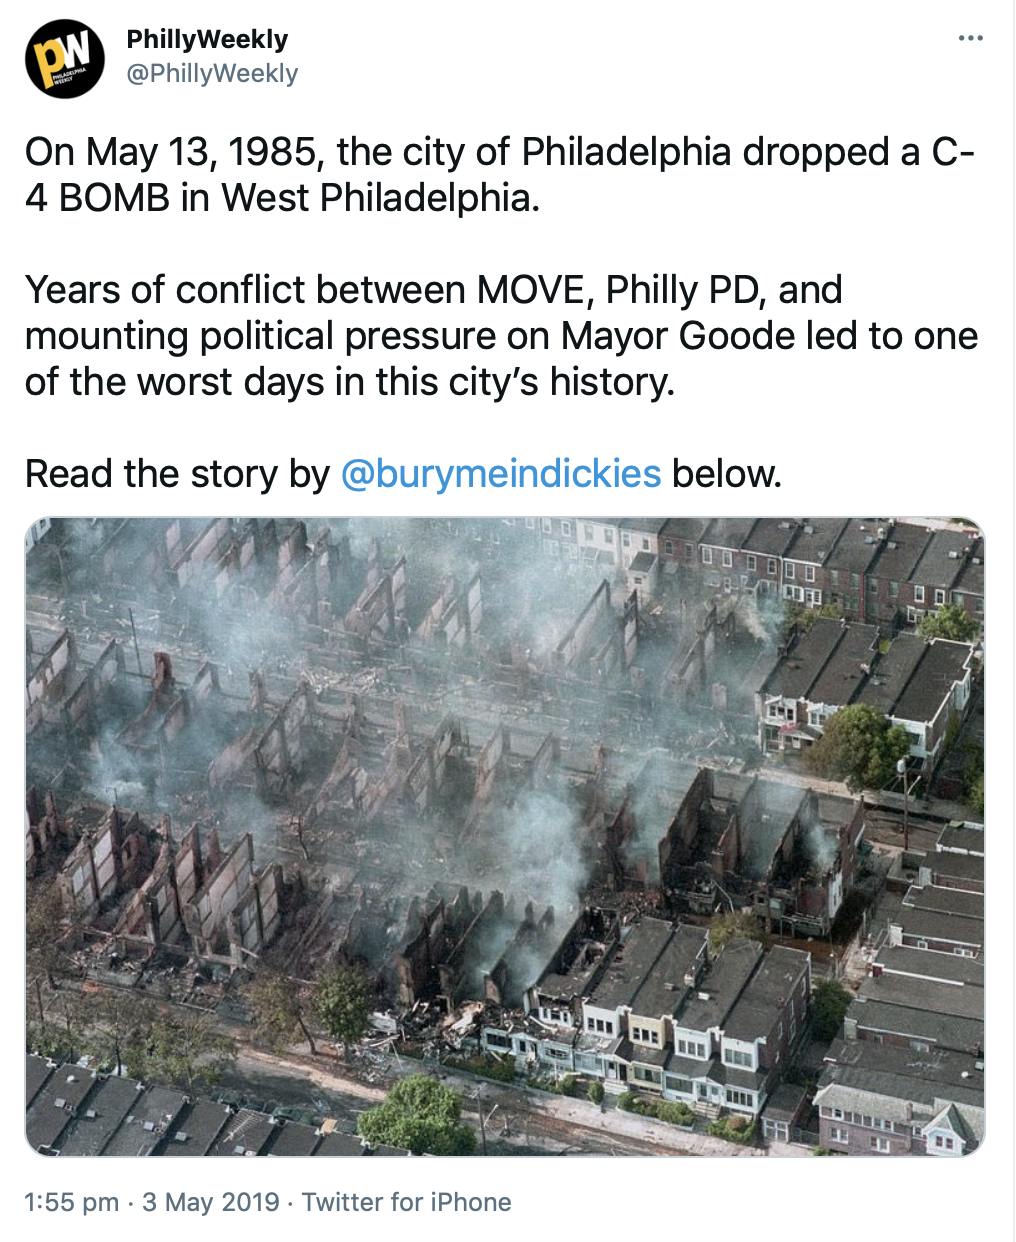 'On May 13, 1985, the city of Philadelphia dropped a C-4 BOMB in West Philadelphia. Years of conflict between MOVE, Philly PD, and mounting political pressure on Mayor Goode led to one of the worst days in this city’s history. Read the story by @burymeindickies below.' aerial photograph of burned out buildings, still smoking